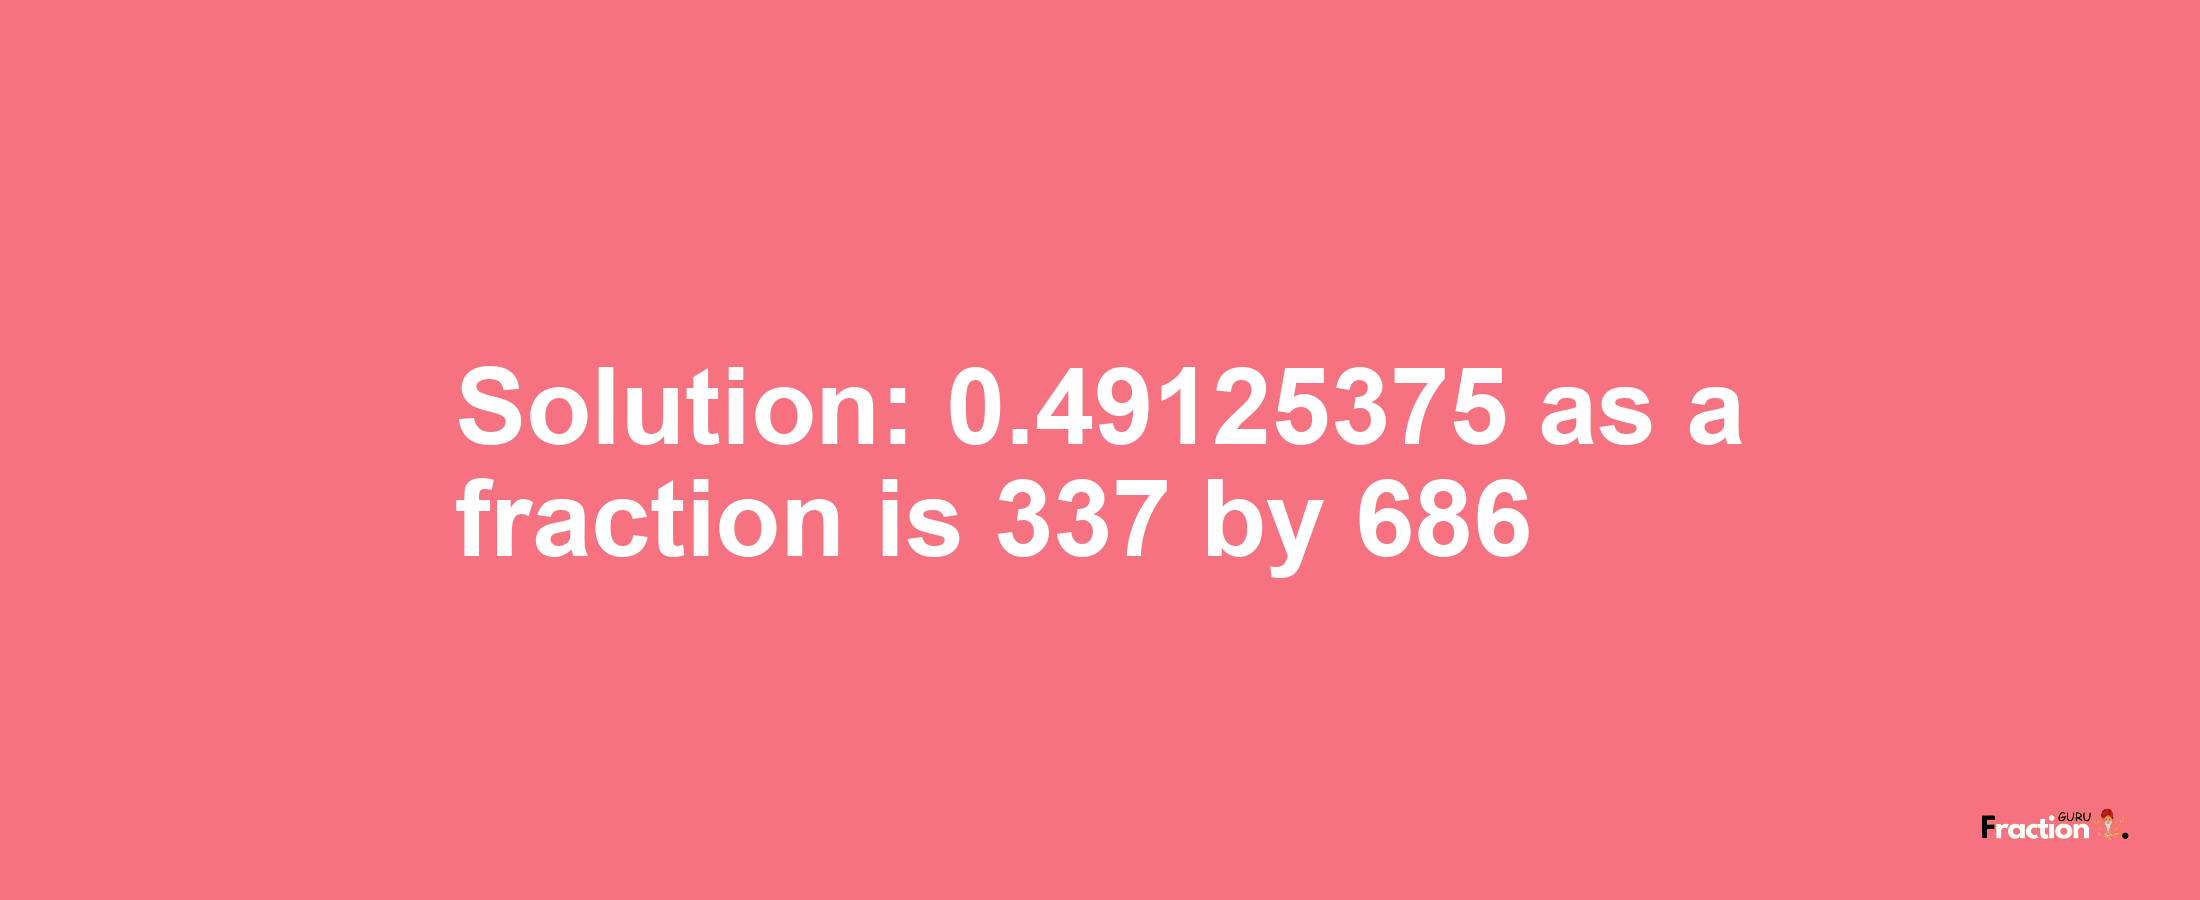 Solution:0.49125375 as a fraction is 337/686